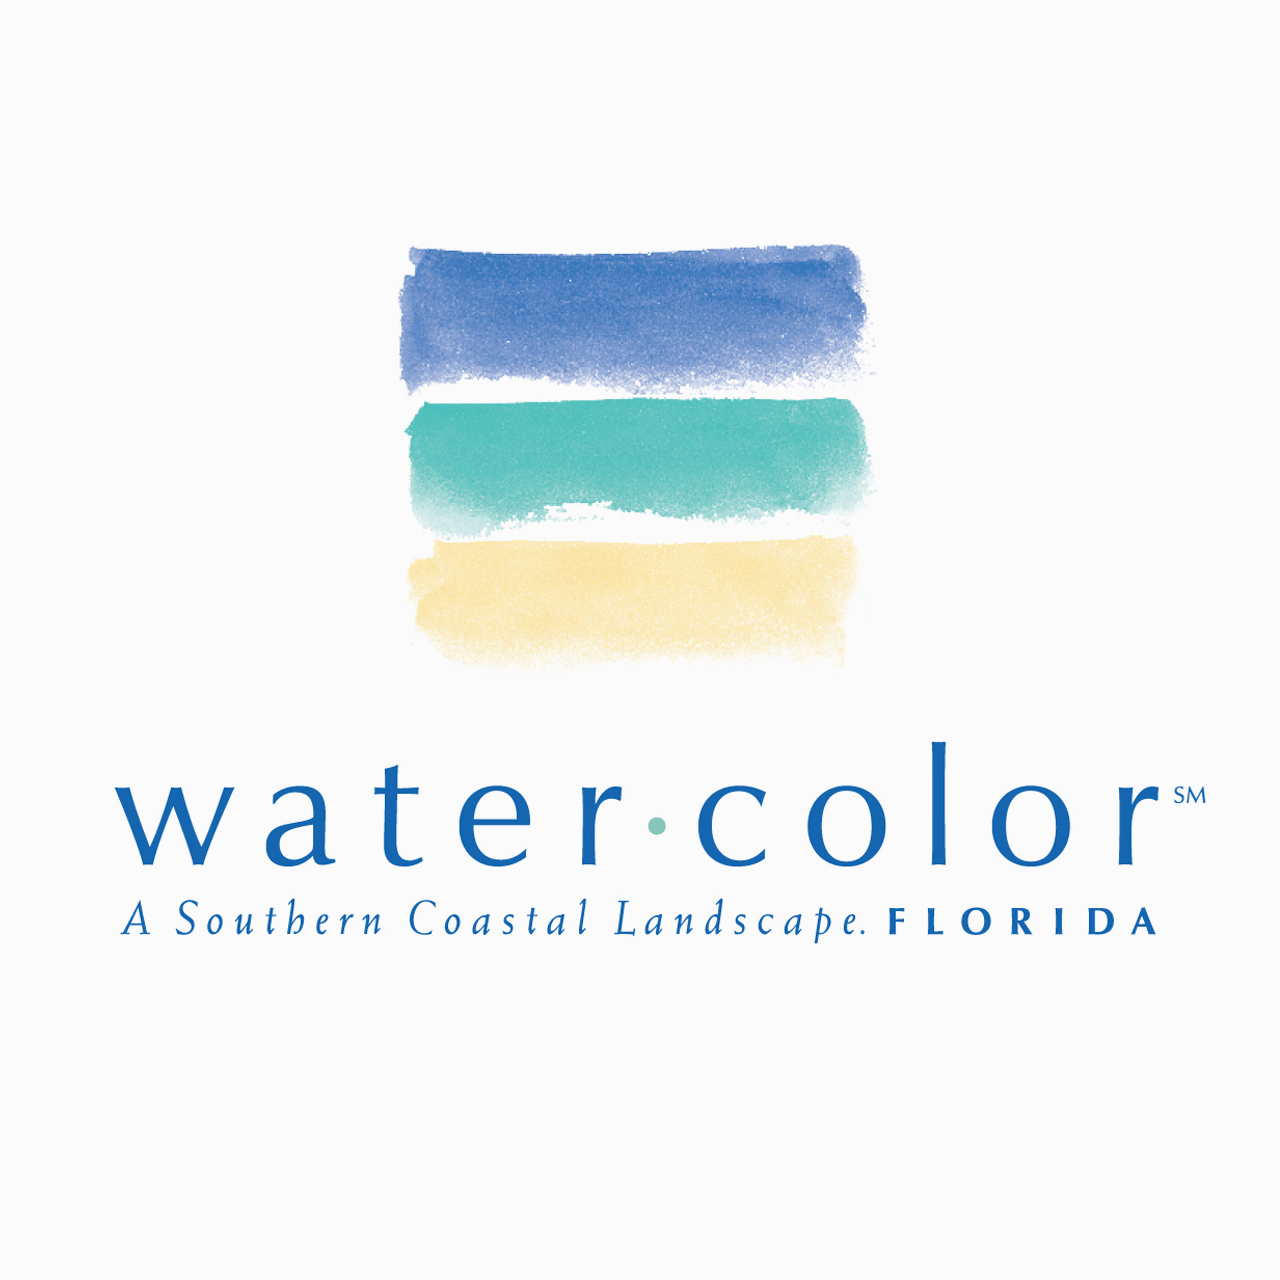 Logo design and type treatment for Water Color Resort, Florida